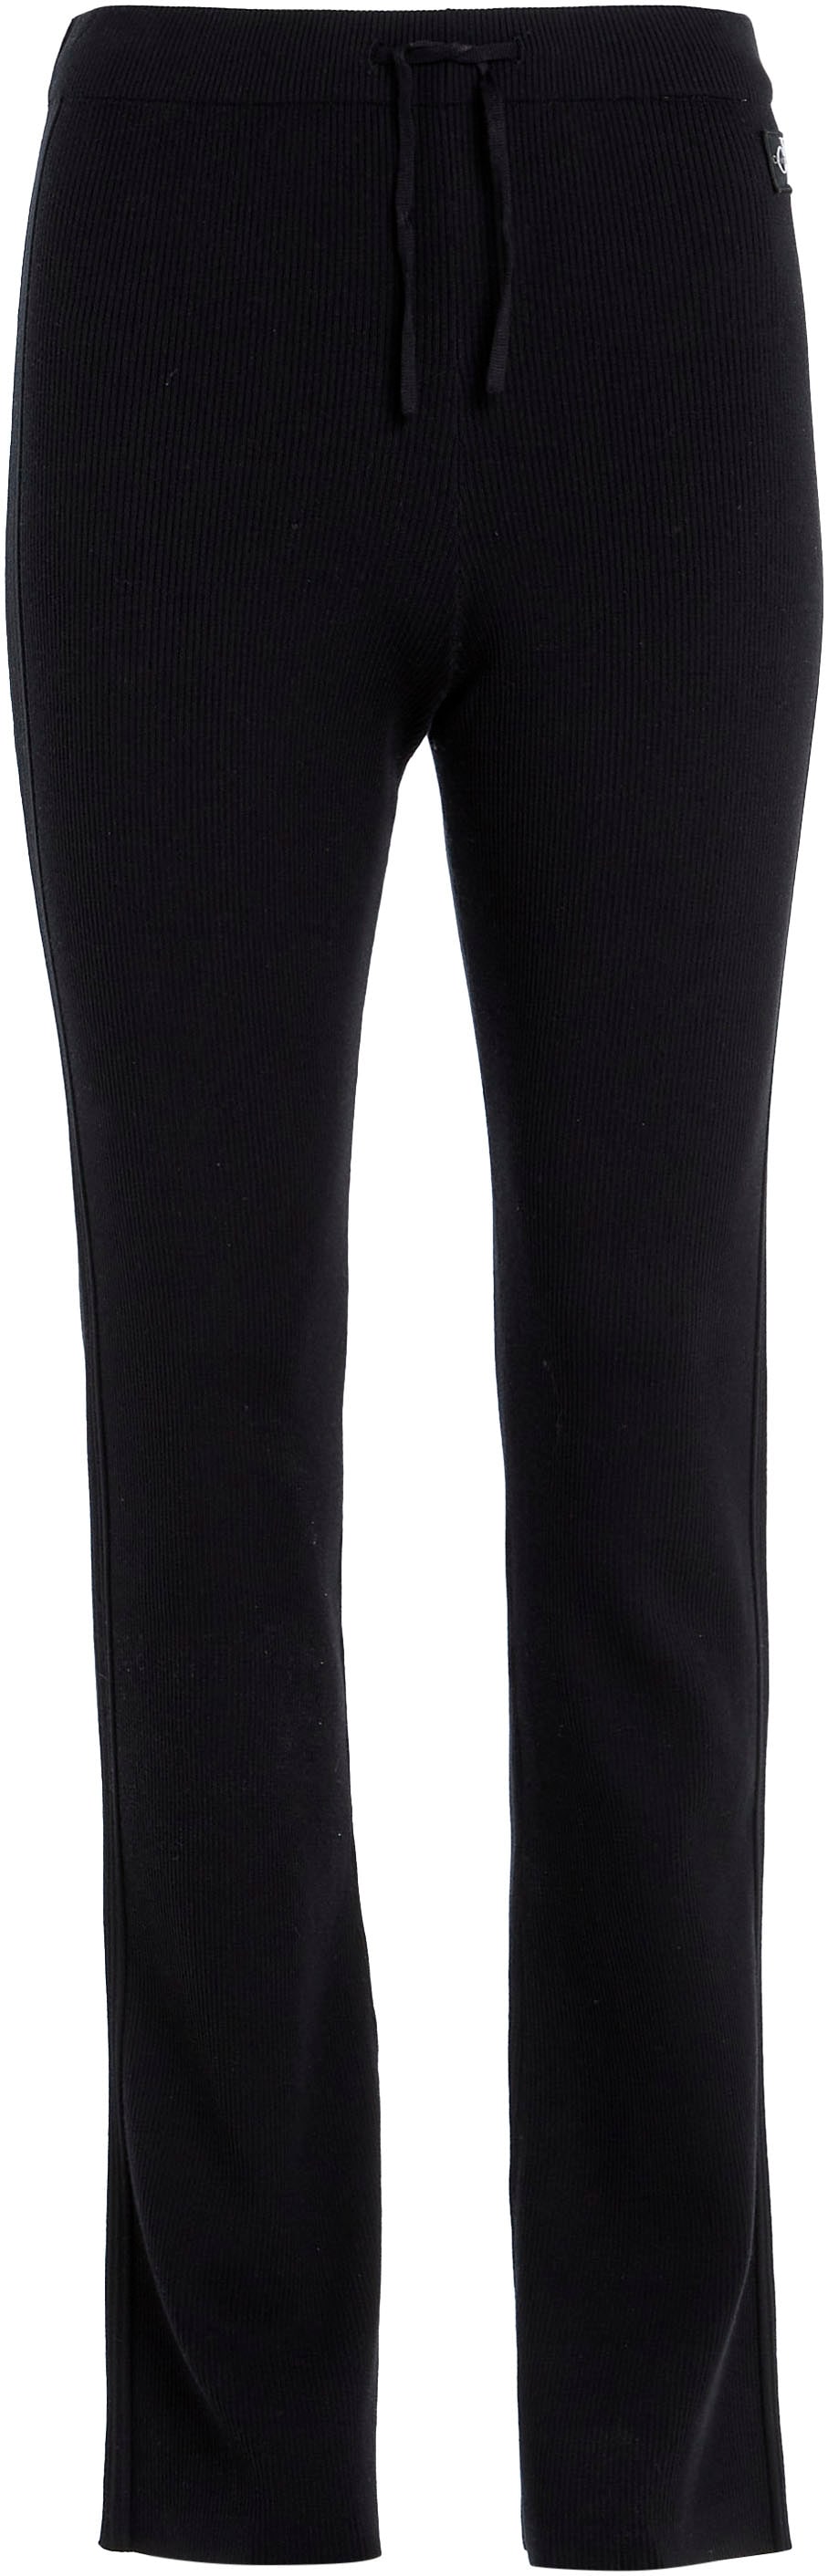 STRAIGHT Calvin PANTS« Jeans bei KNITTED »BADGE Jerseyhose Klein ♕